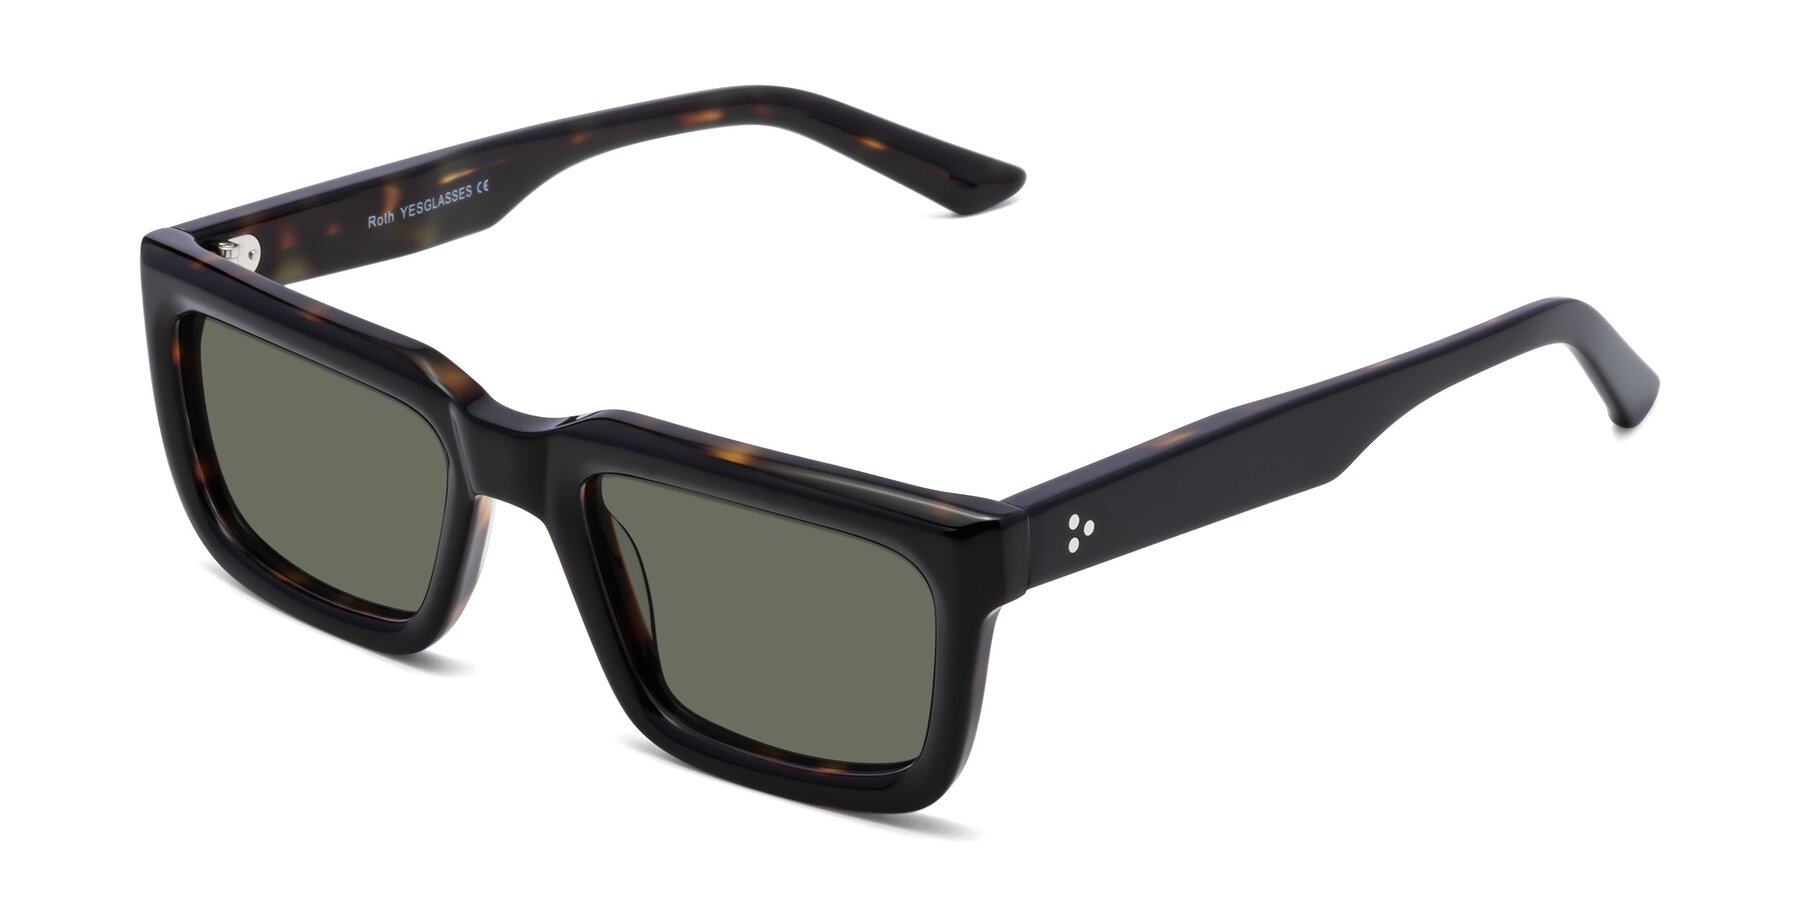 Angle of Roth in Black-Tortoise with Gray Polarized Lenses